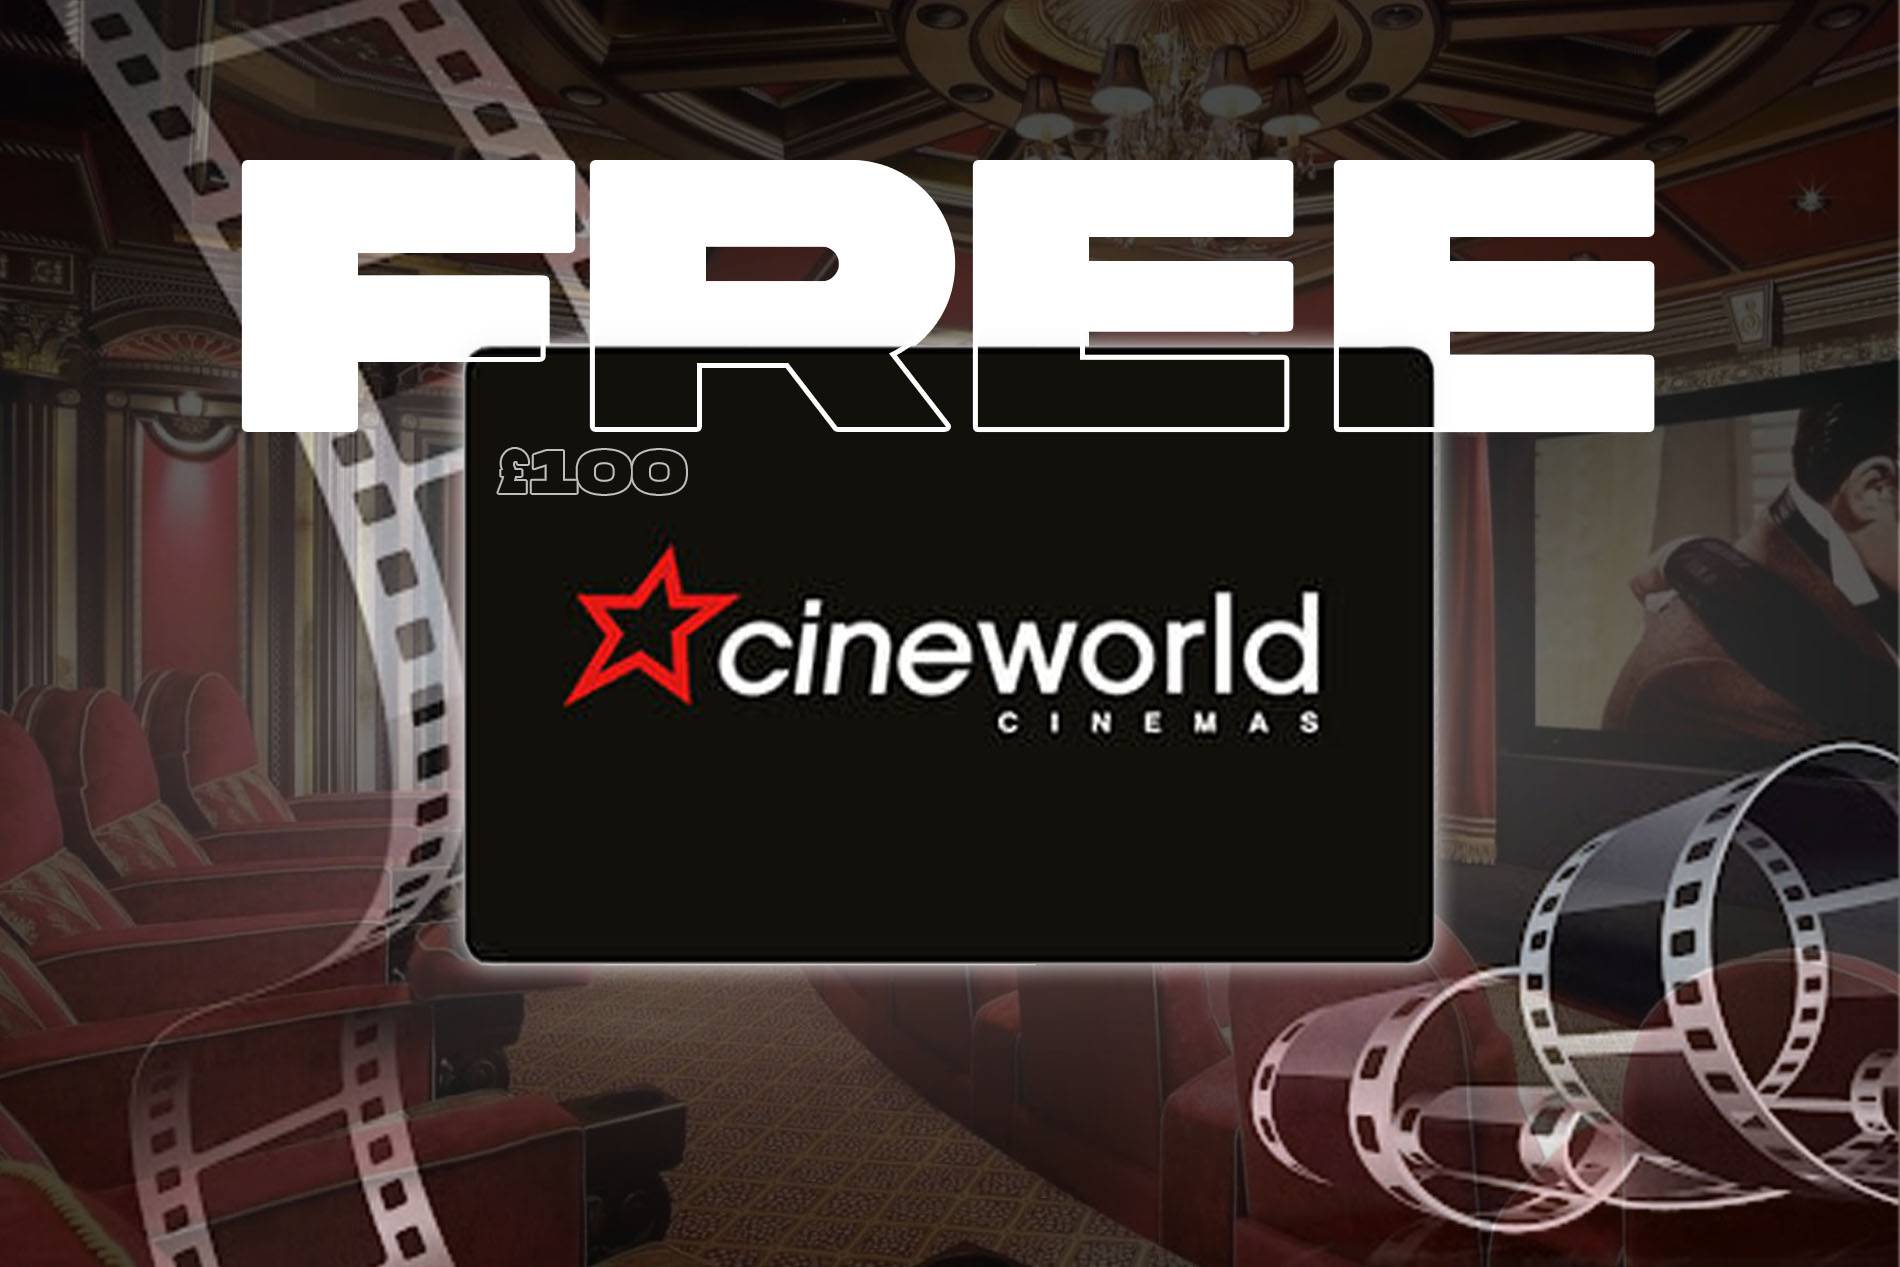 FREE: Chance To Win £100 Cineworld Voucher (Prize Tripled Over £1 Spend)